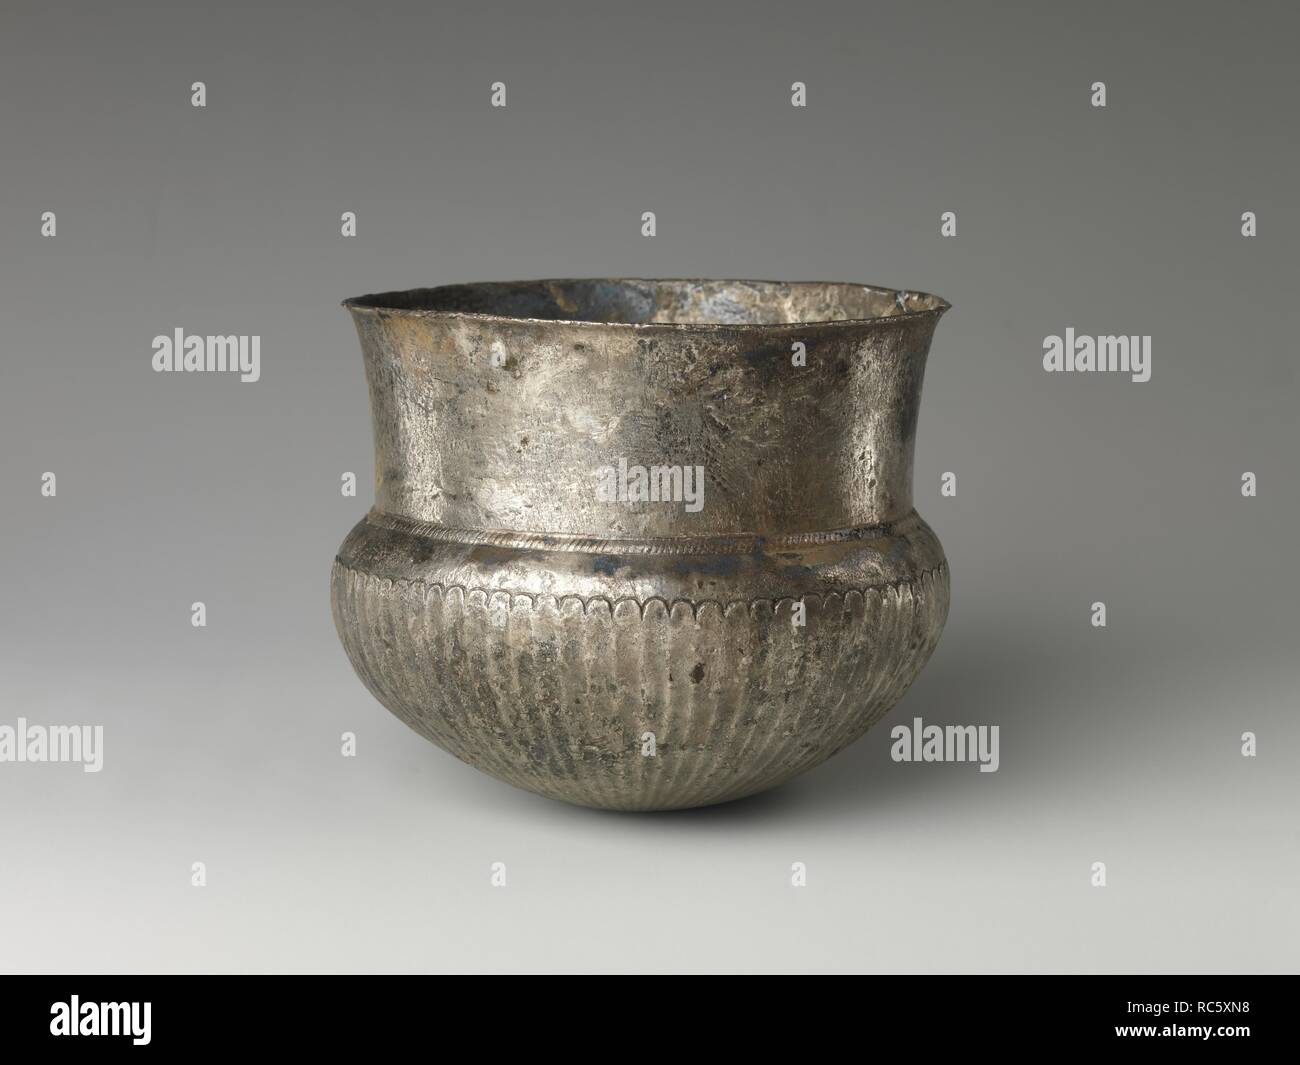 Bowl with flutes from shoulder to rosette at base and with inscribed weight. Dimensions: H. 10.5 x Diam. 12 cm at mouth, 13 at body (4 1/8 x 4 3/4 and 5 1/8 in). Date: 4th century B.C..  The heavy silver vessels 18.2.13-18.2.17 are in created in a decorative style widespread in the Greek world, and can be dated to the fourth century BC. They. are said to have been found together in the Egyptian Delta.   Several of the vessels have small Demotic designations scored into the rim recording the weight of the silver, which correlated with the vessel's value. The larger weight unit was a deben (abou Stock Photo